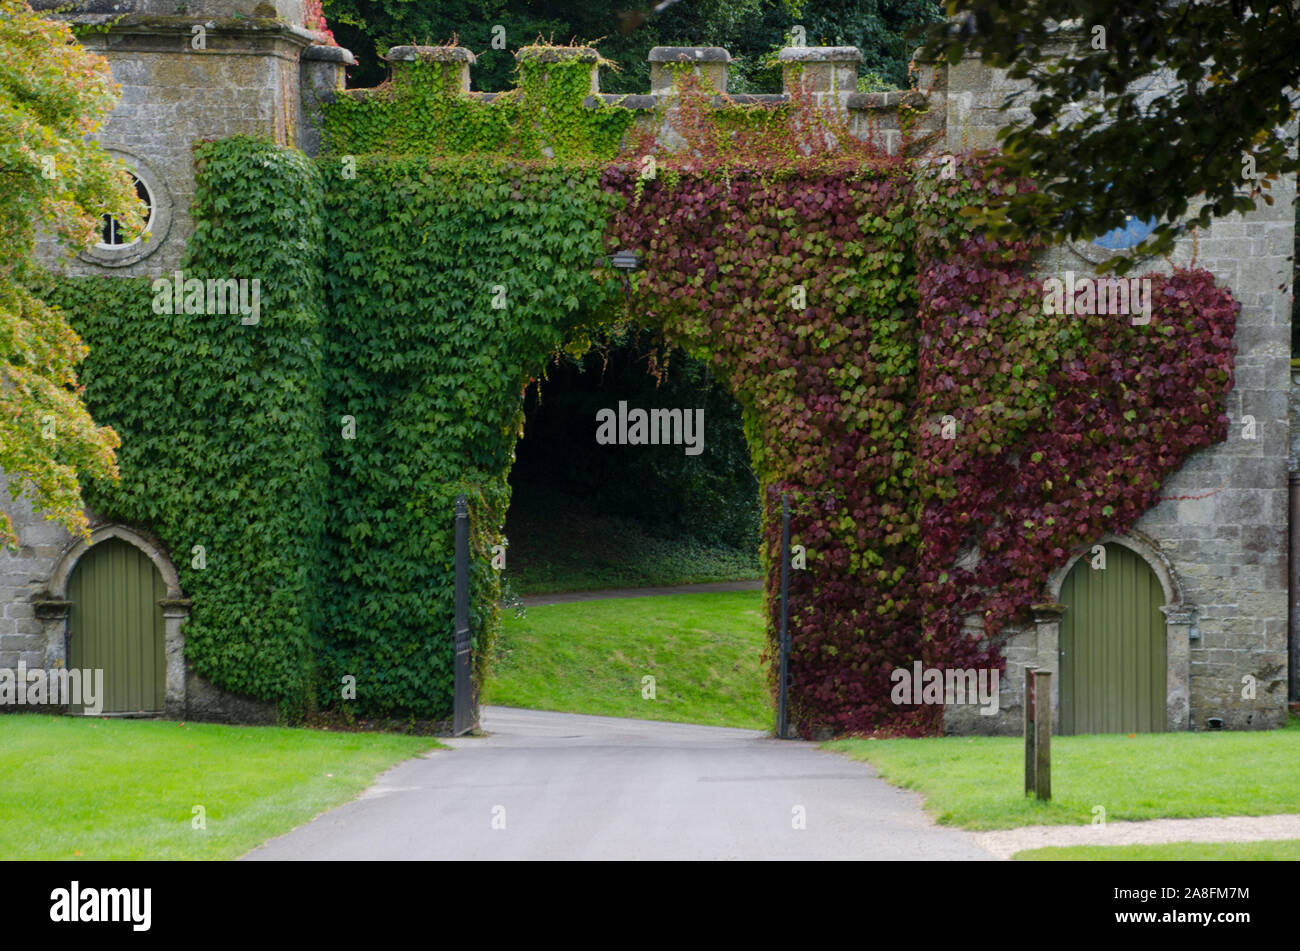 Early fall English ivy vines climbing on a stone archway in Stourhead gardens, Wiltshire, UK Stock Photo